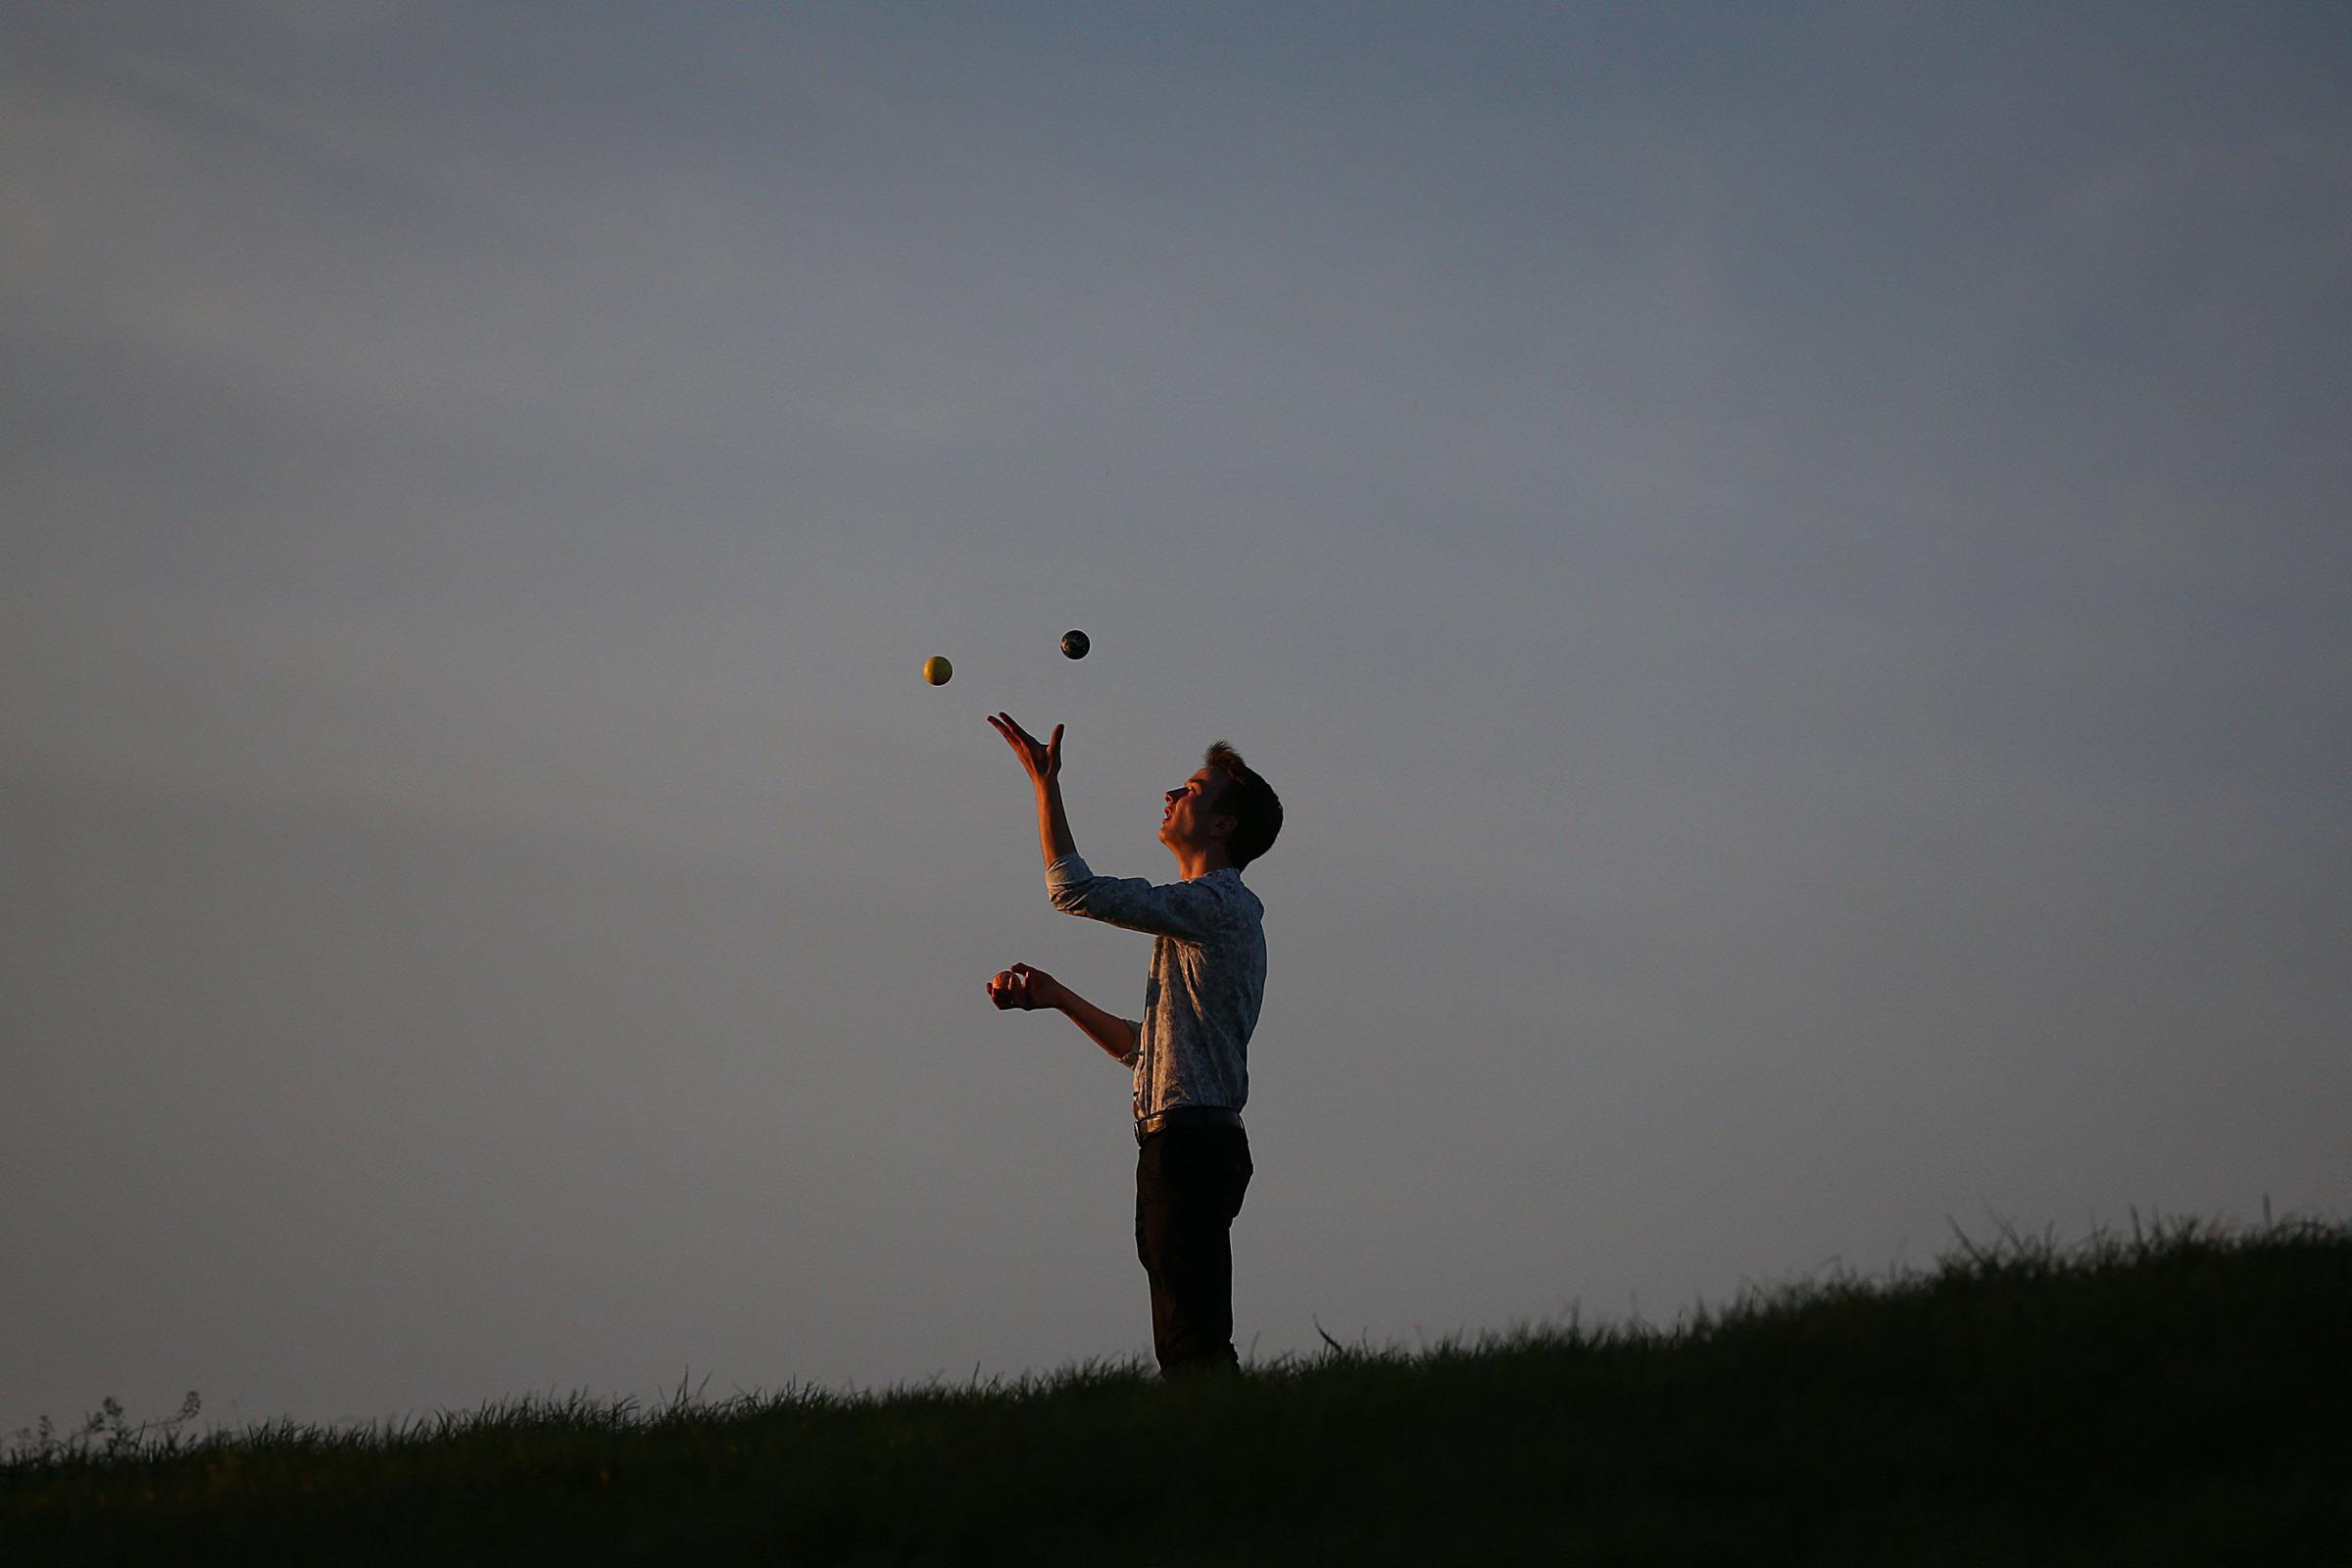 A man juggles on Primrose Hill on October 28, 2014 in London, England.